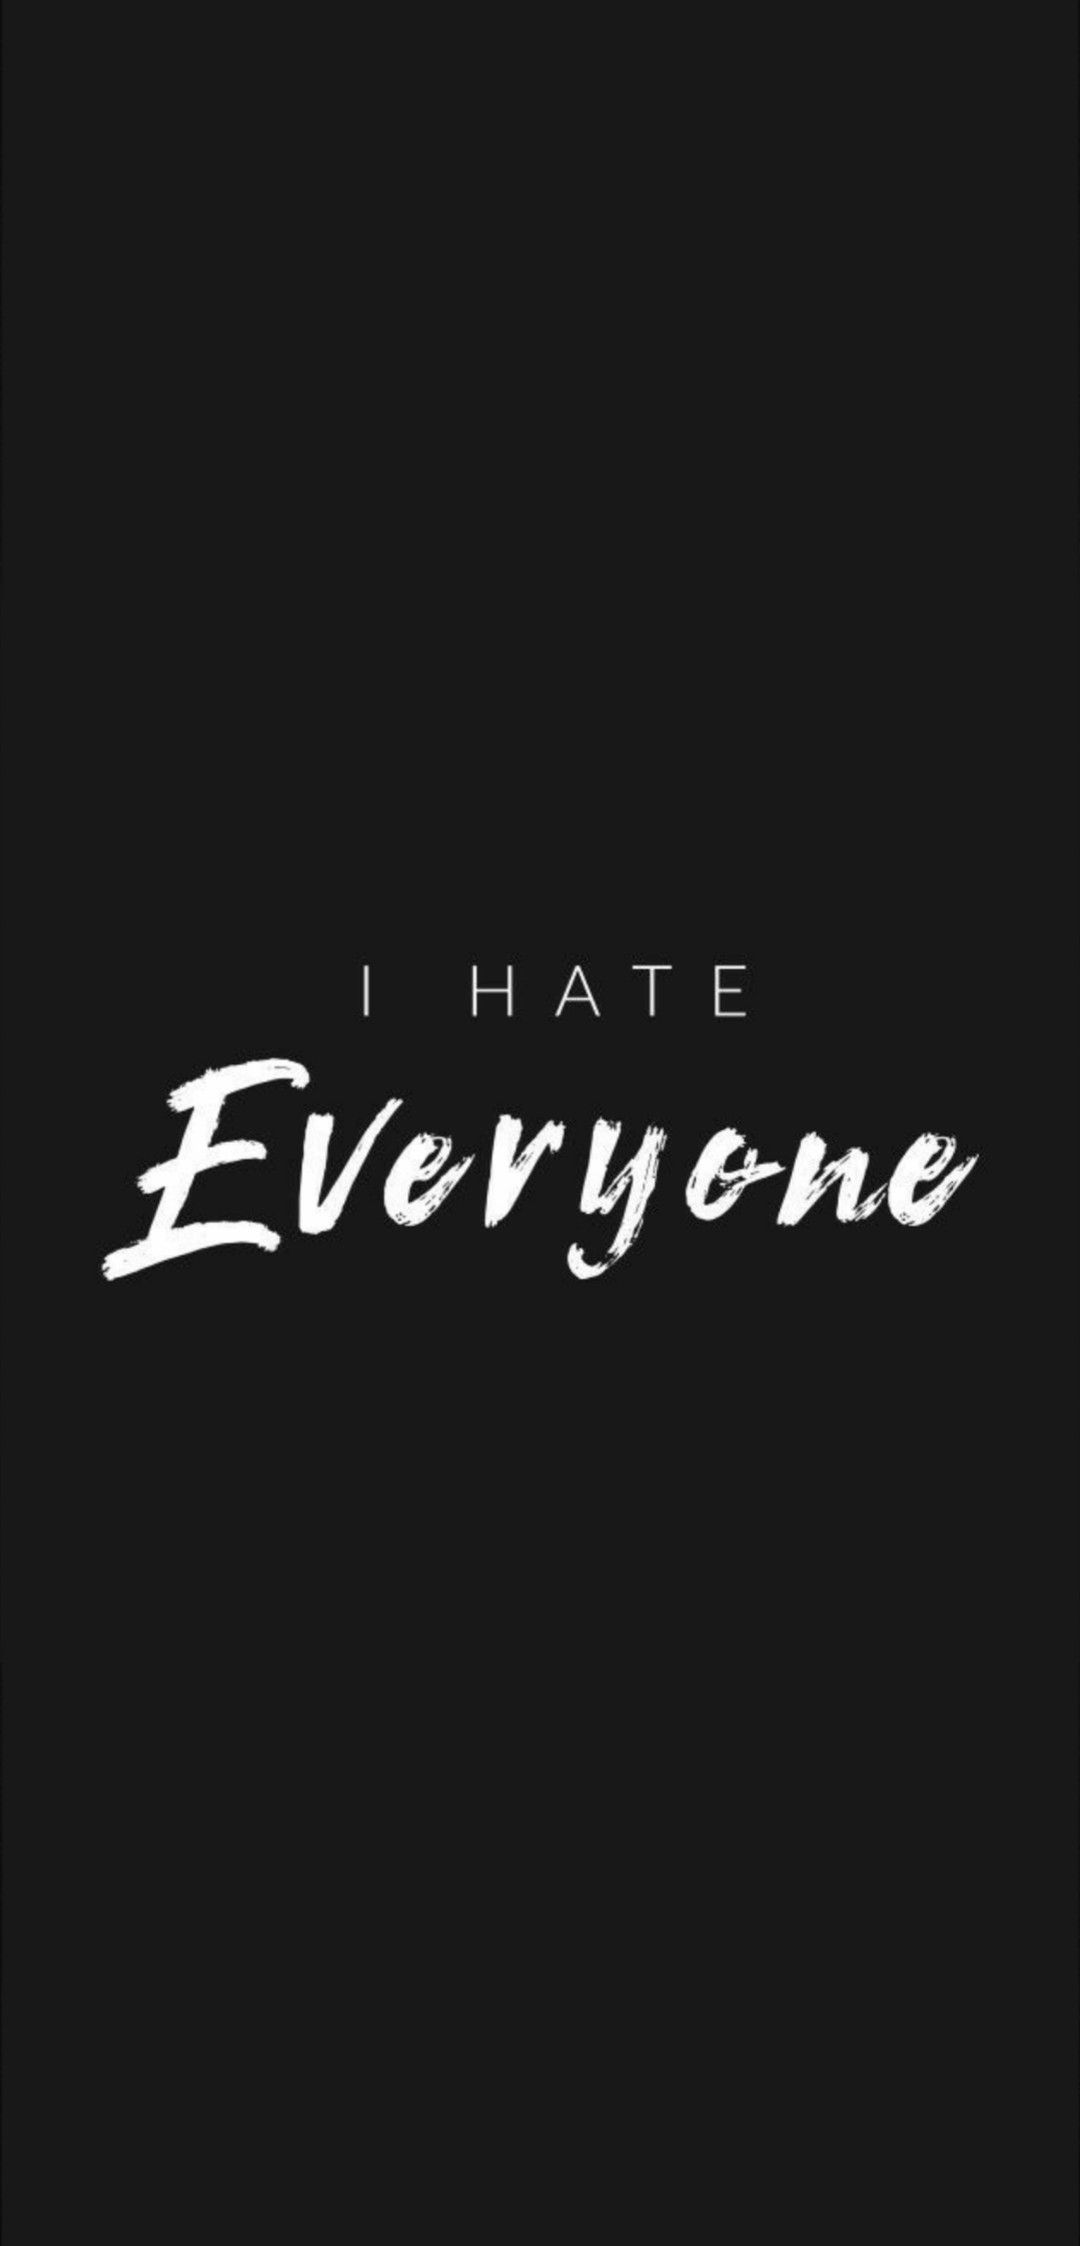 I Hate Everyone wallpaper by Gid5th  Download on ZEDGE  4568